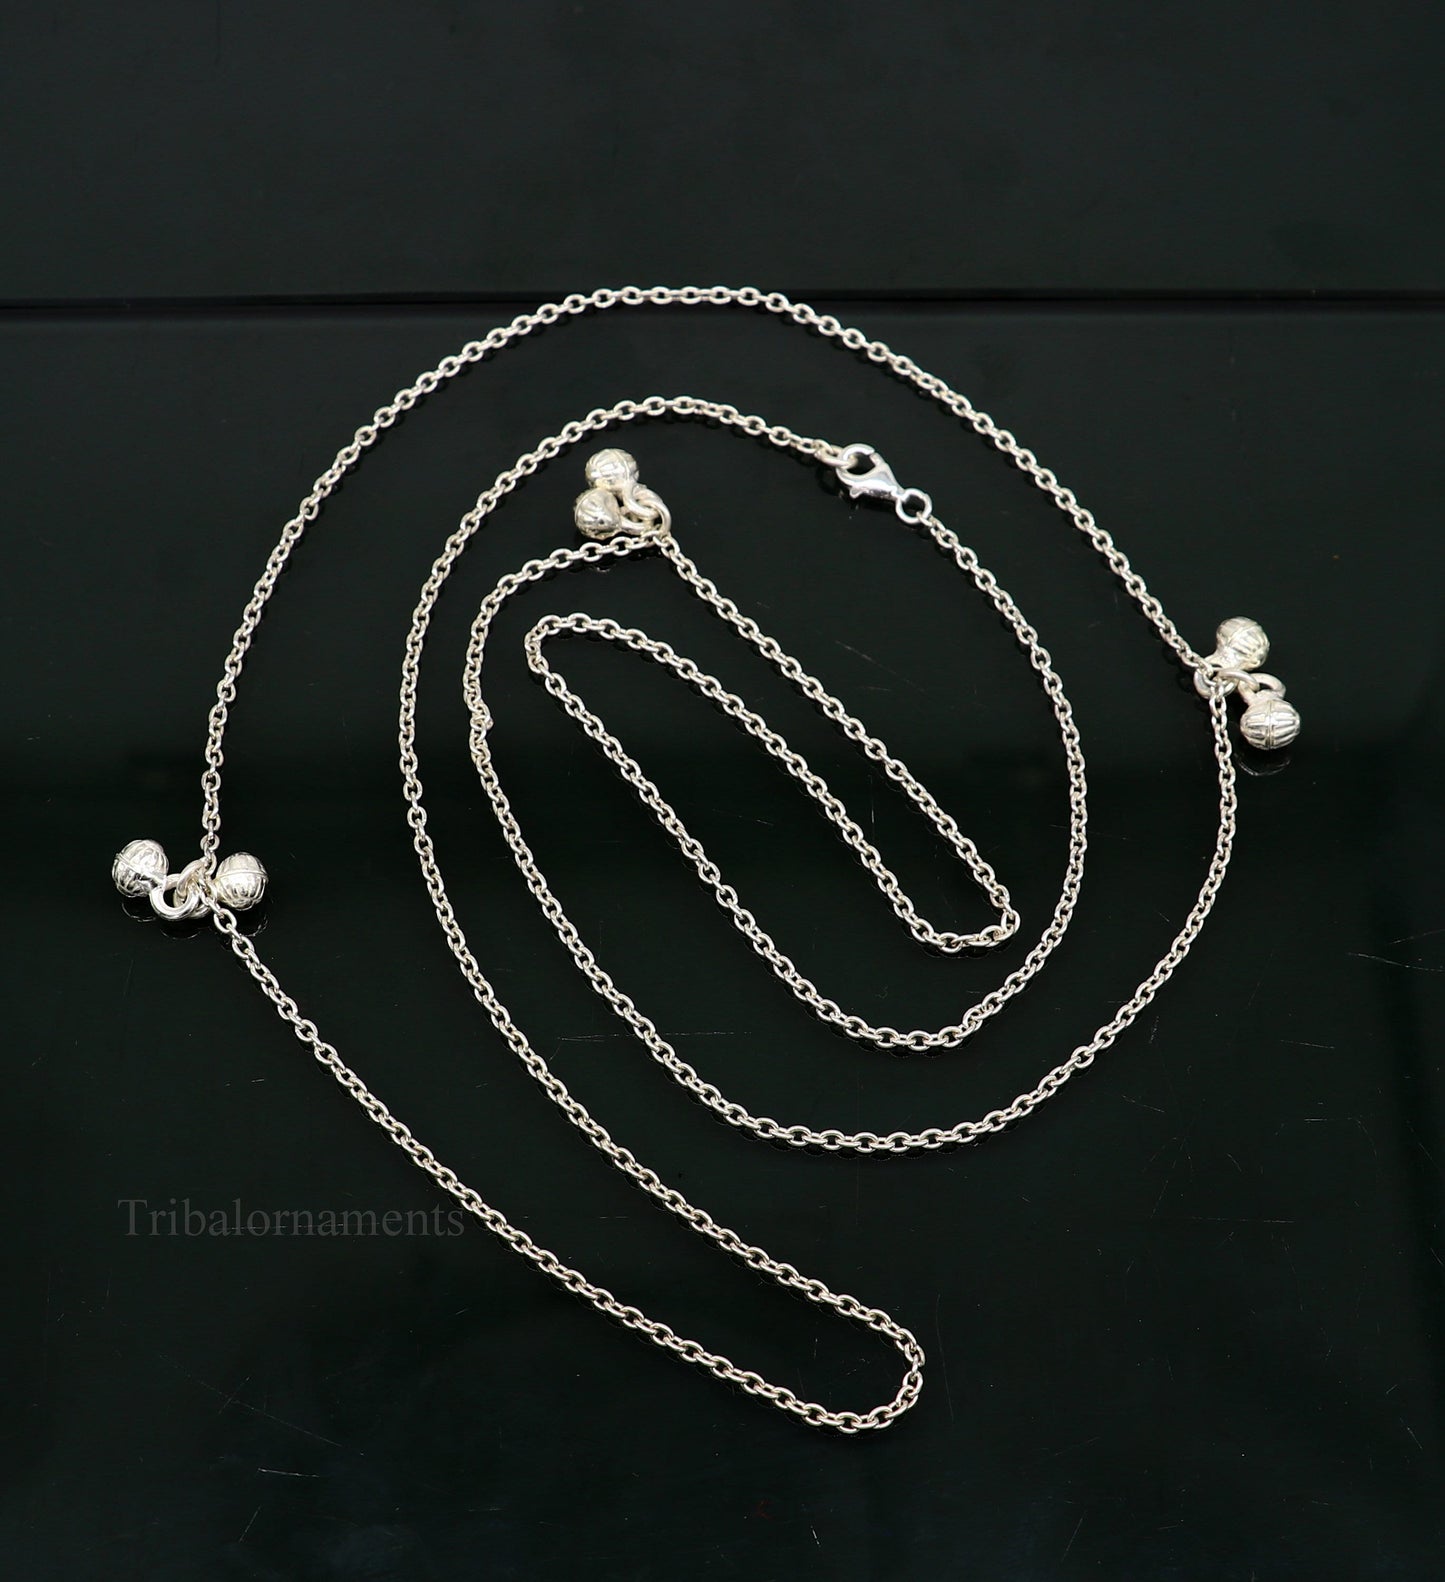 Pure 925 sterling silver handmade Link chain design belly chain, waist chain, gorgeous belly Saree chain belt for dance tribal jewelry wch10 - TRIBAL ORNAMENTS